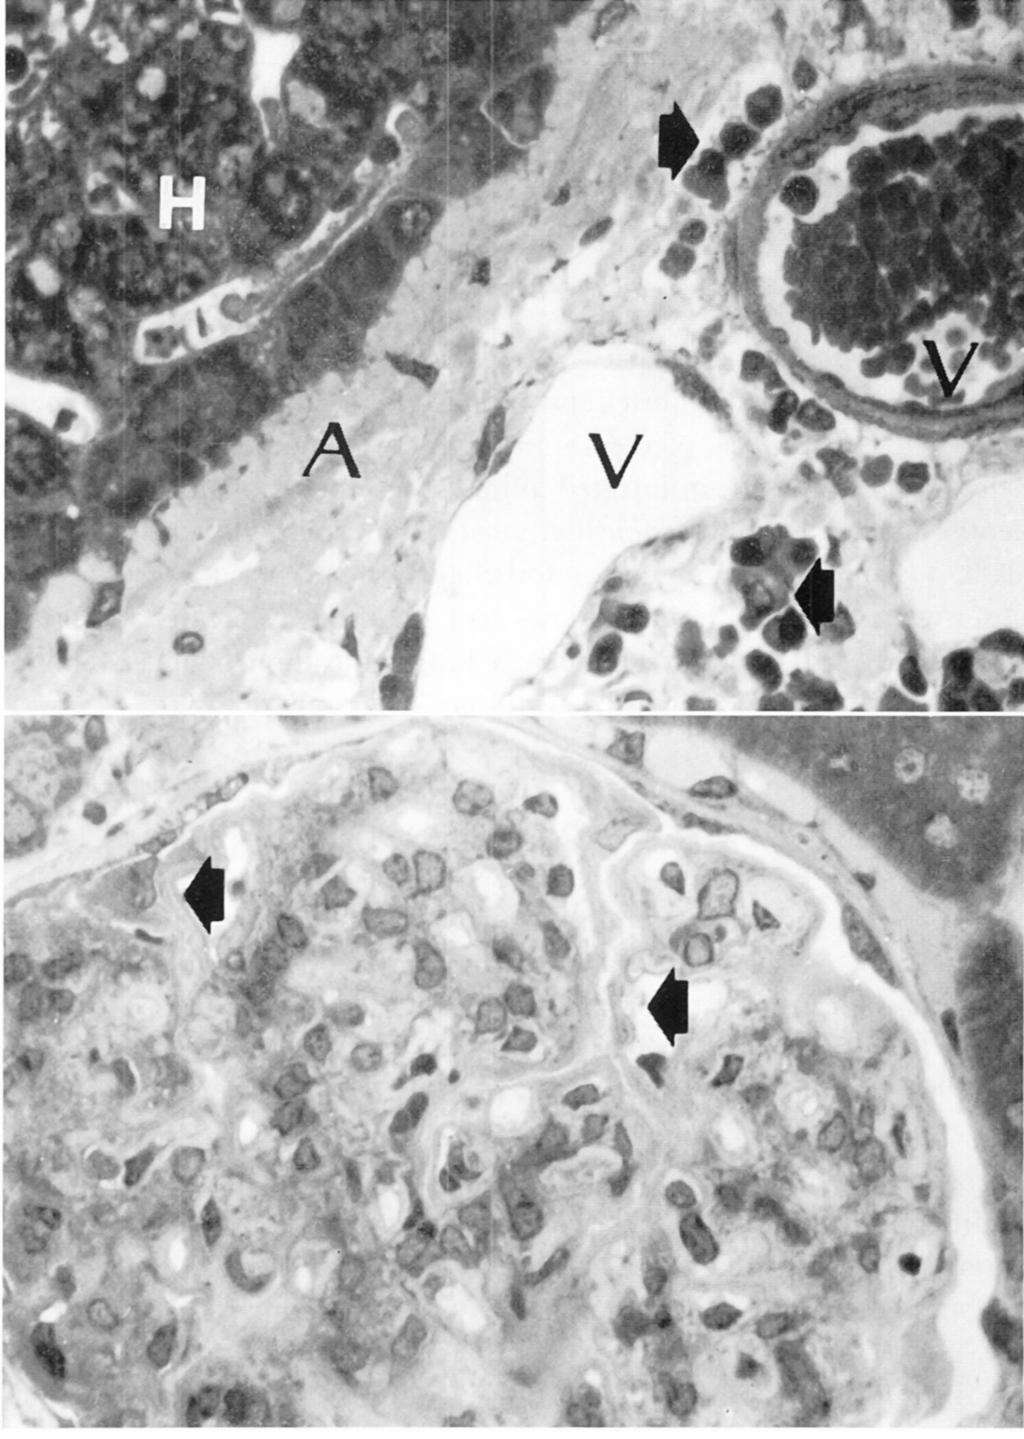 I82 CROWELL/VOTAVA Fig. 1. A section, I pm thick, of liver of hamster with amyloidosis. There are large amounts of amyloid (A) adjacent t o the hepatocytes (H) and vessels (V).